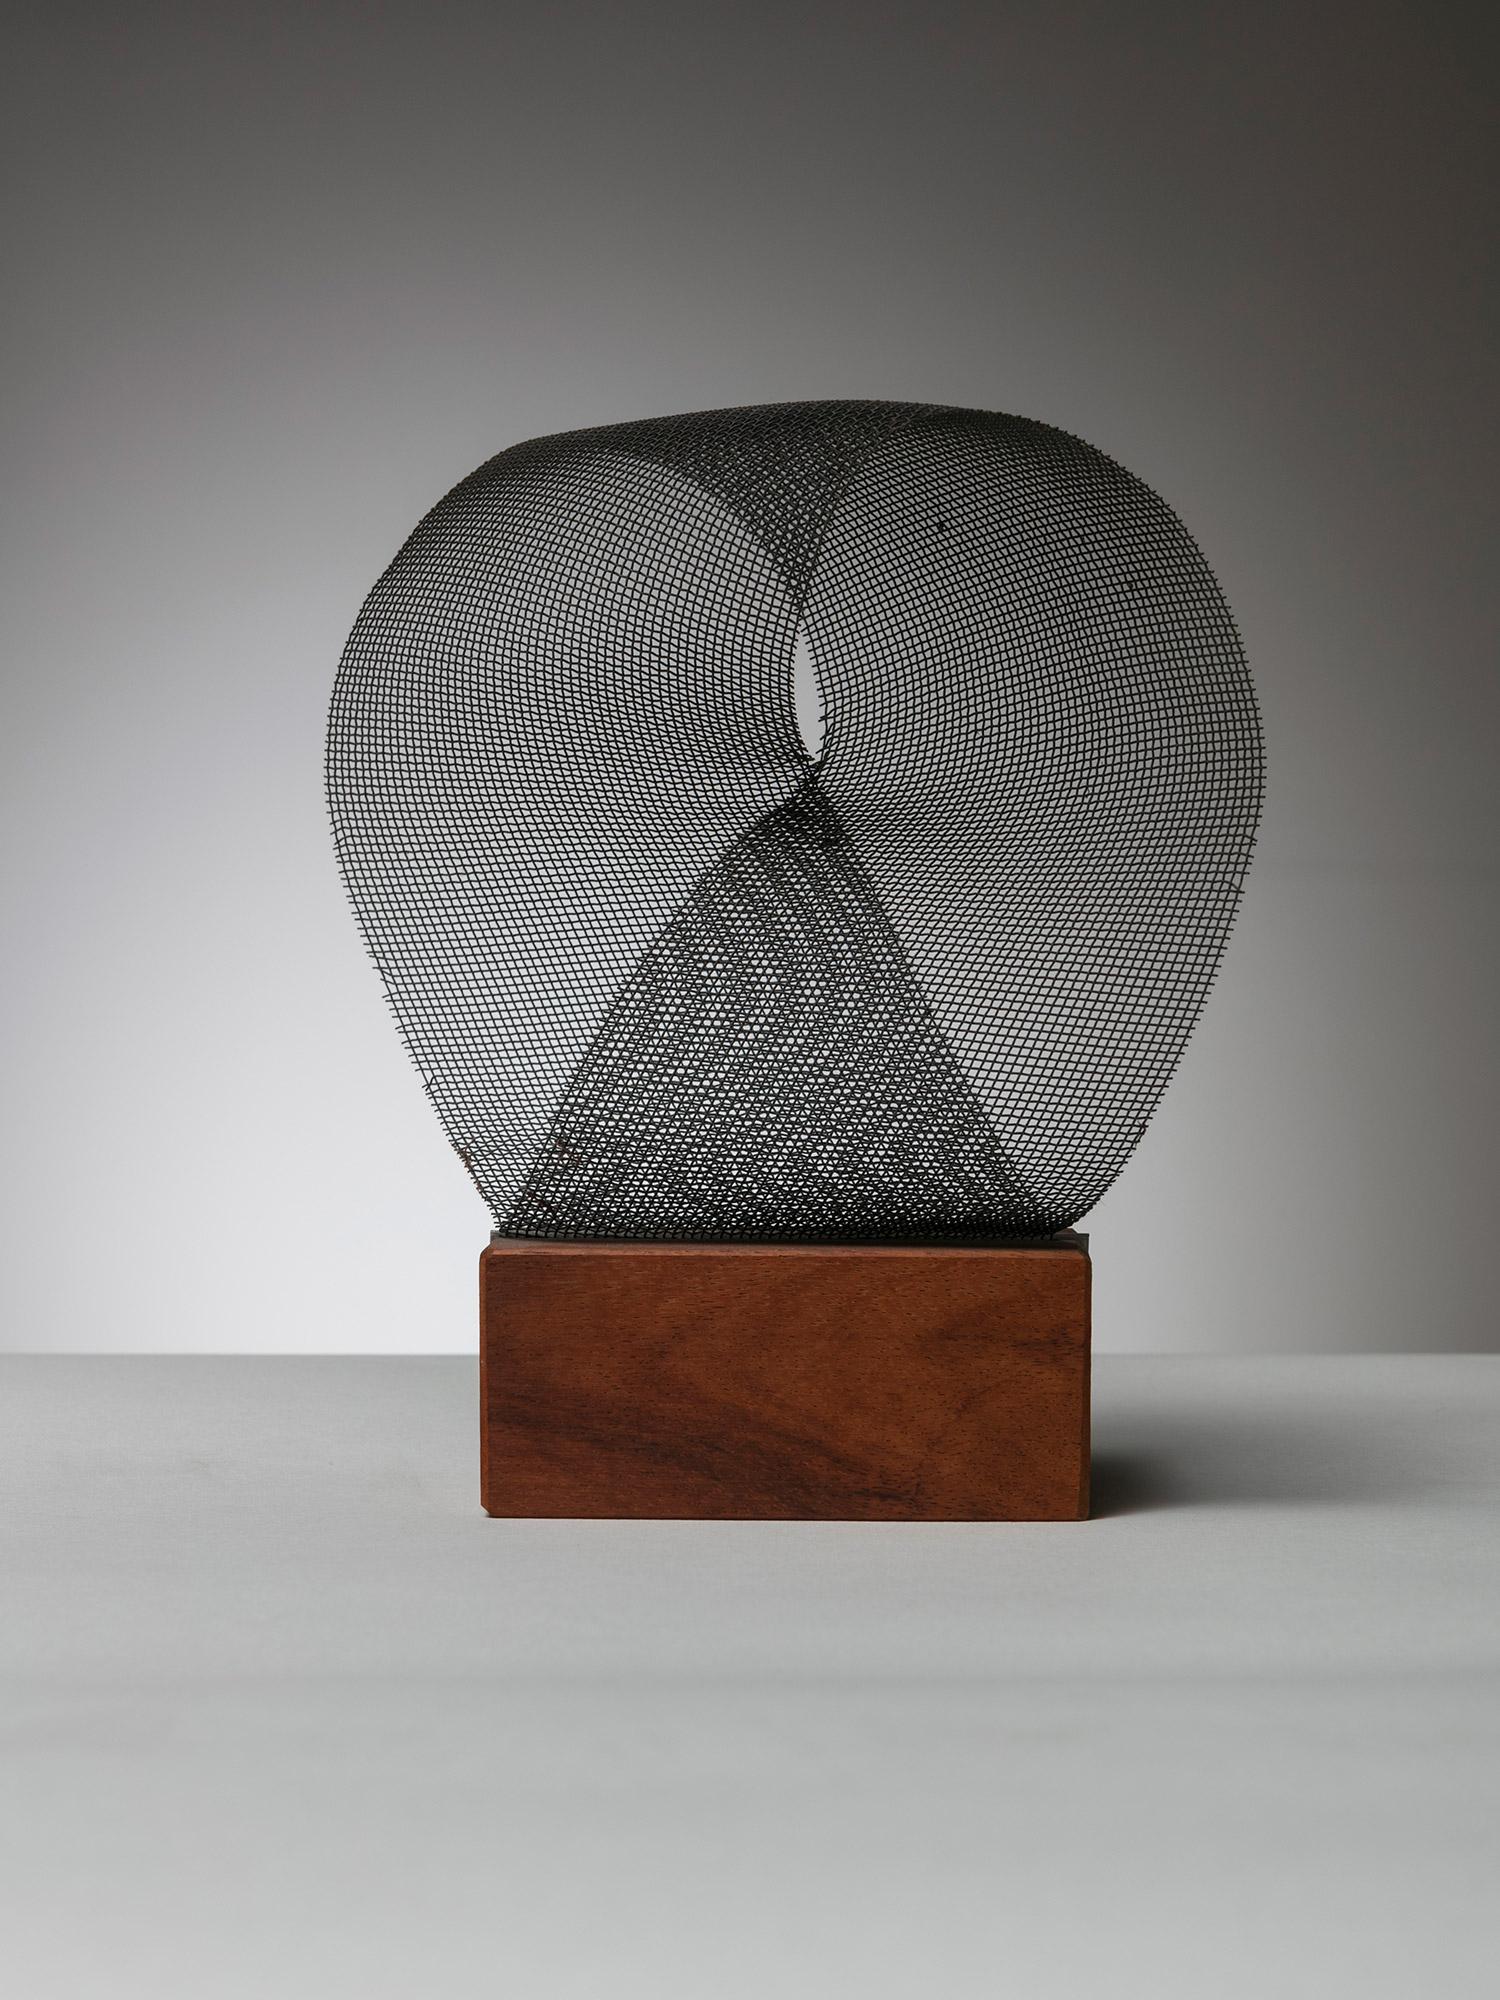 Italian 70s metal sculpture composed by a folded metal net fastened to a wood base.
Titled, signed and numbered piece with connections to Bruno Munari works.